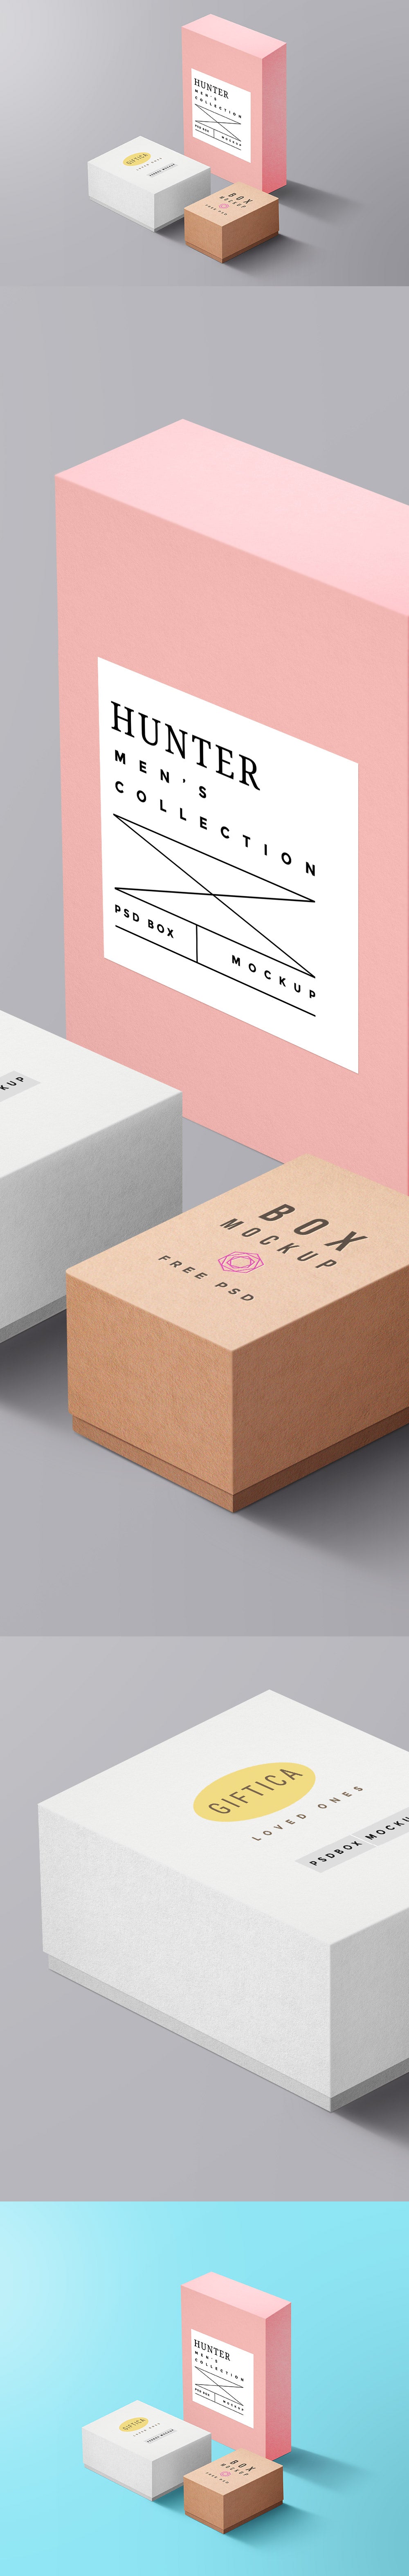 Free Premium Quality Packaging Boxes Mockup PSD